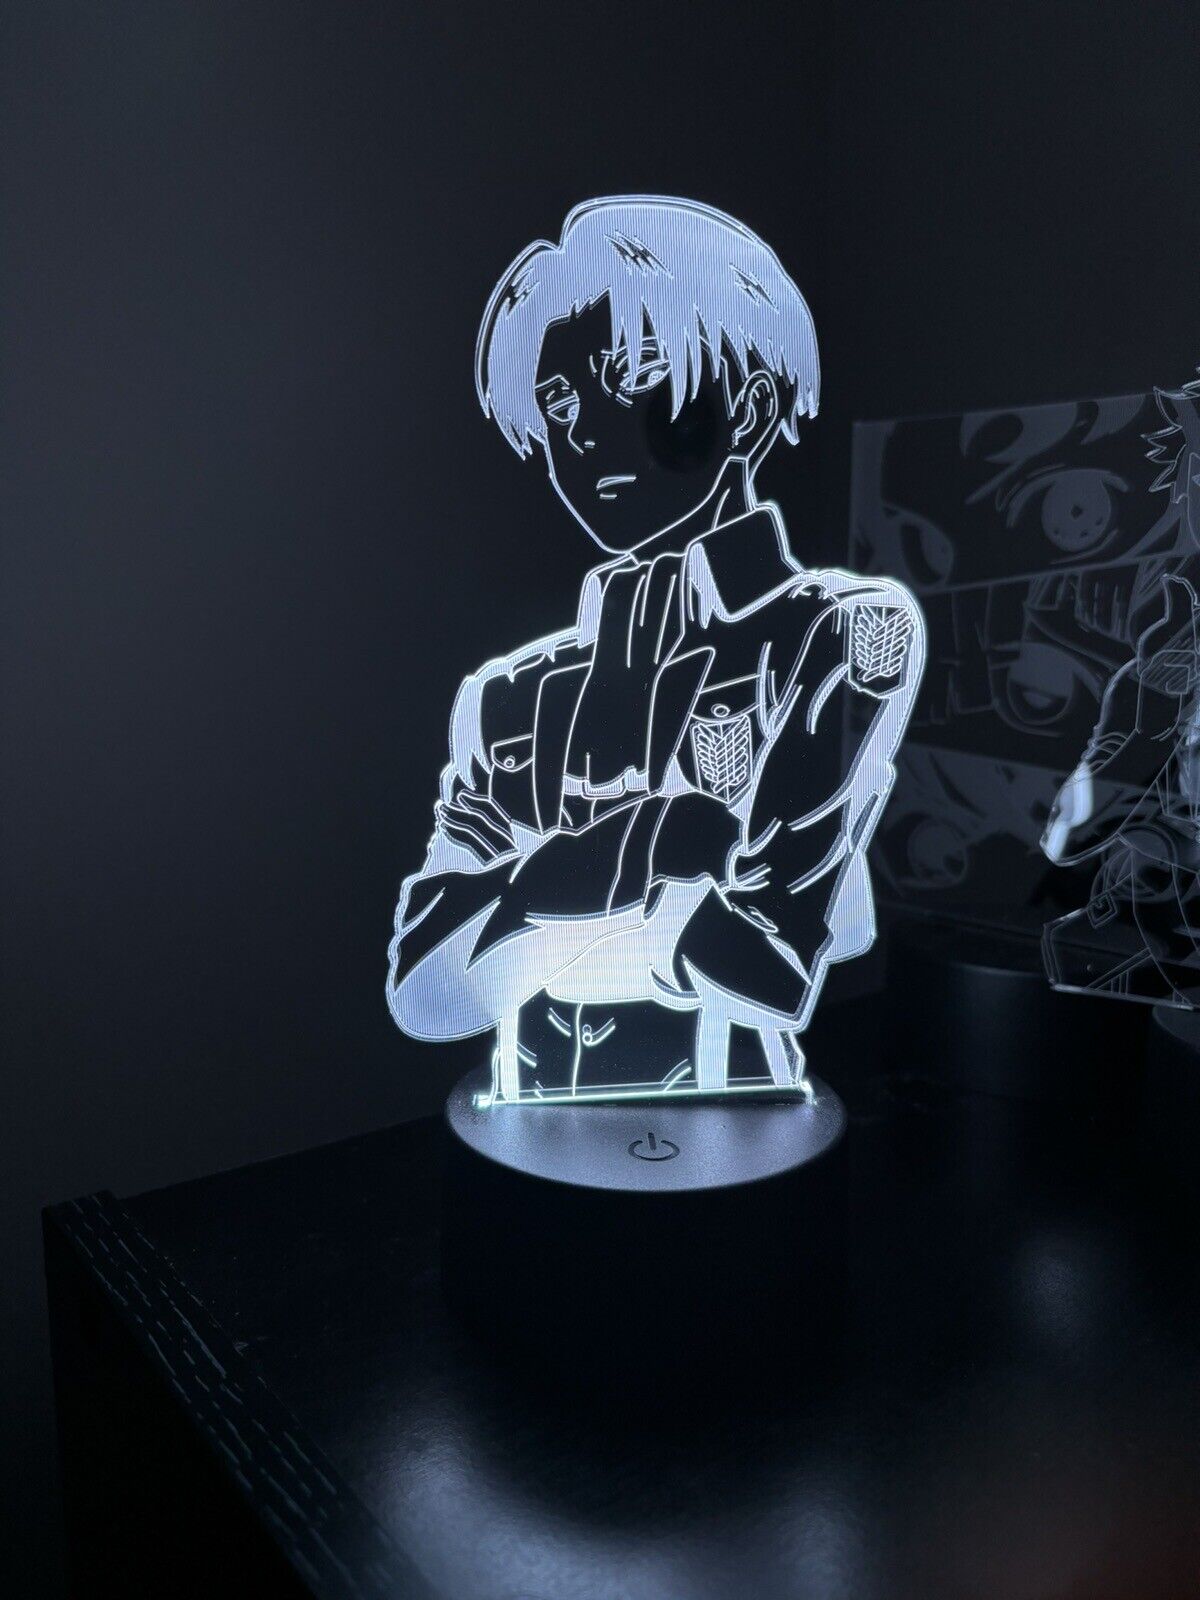 Attack on Titan: Levi 3D USB LED 7-Colors: Color Changing Night Light